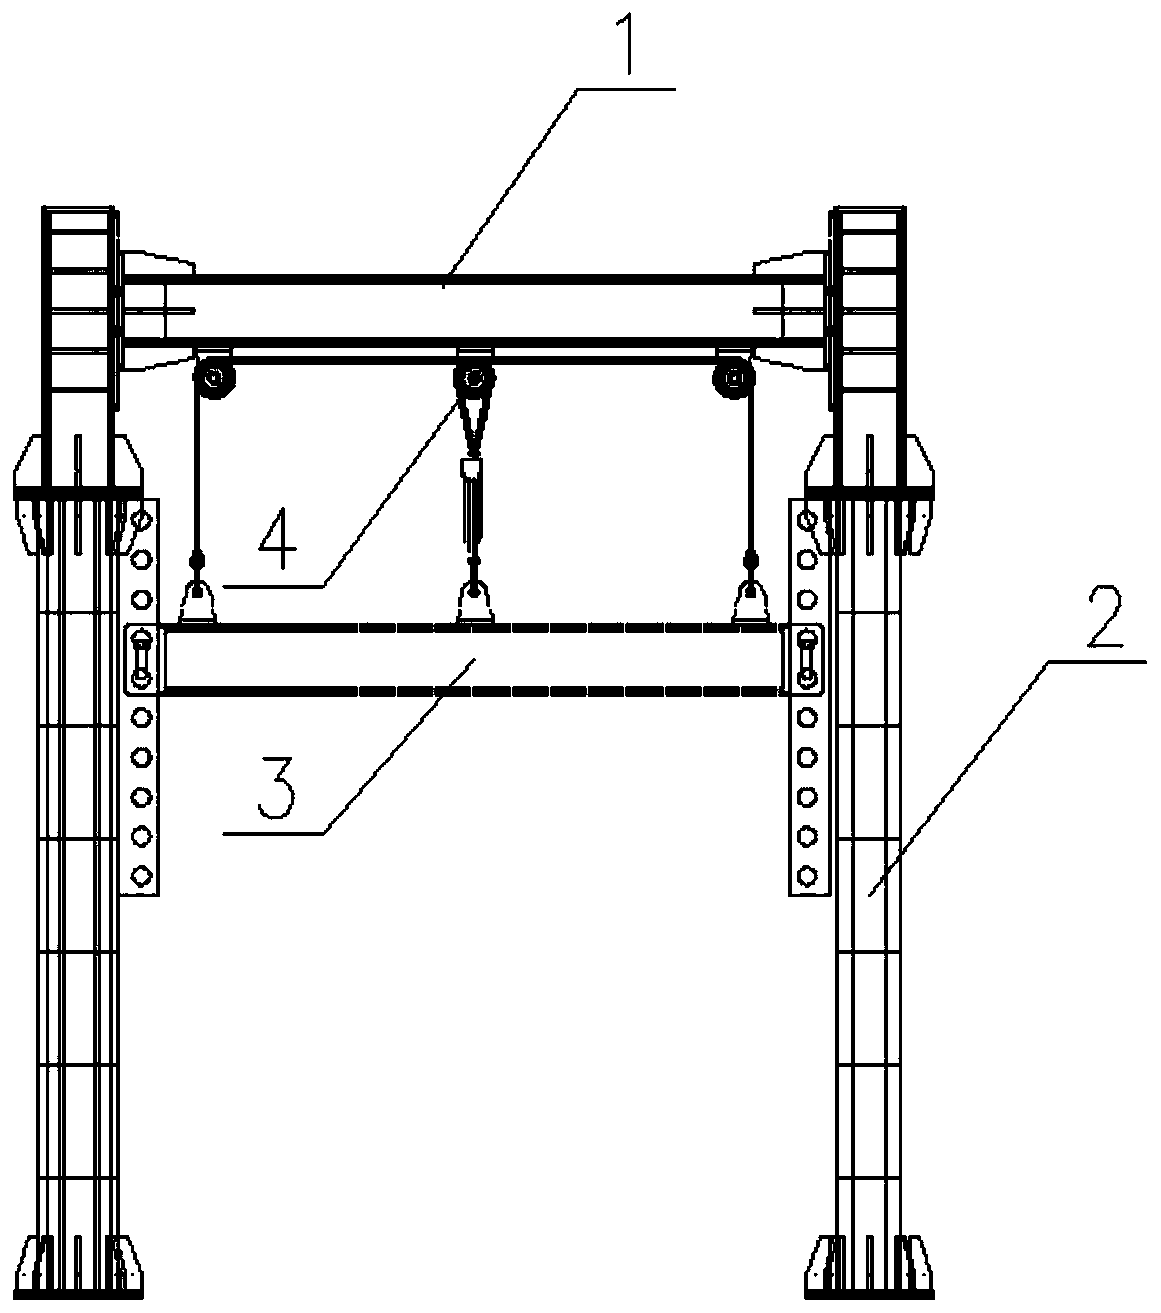 A highway height limit gantry and its height limit adjustment method